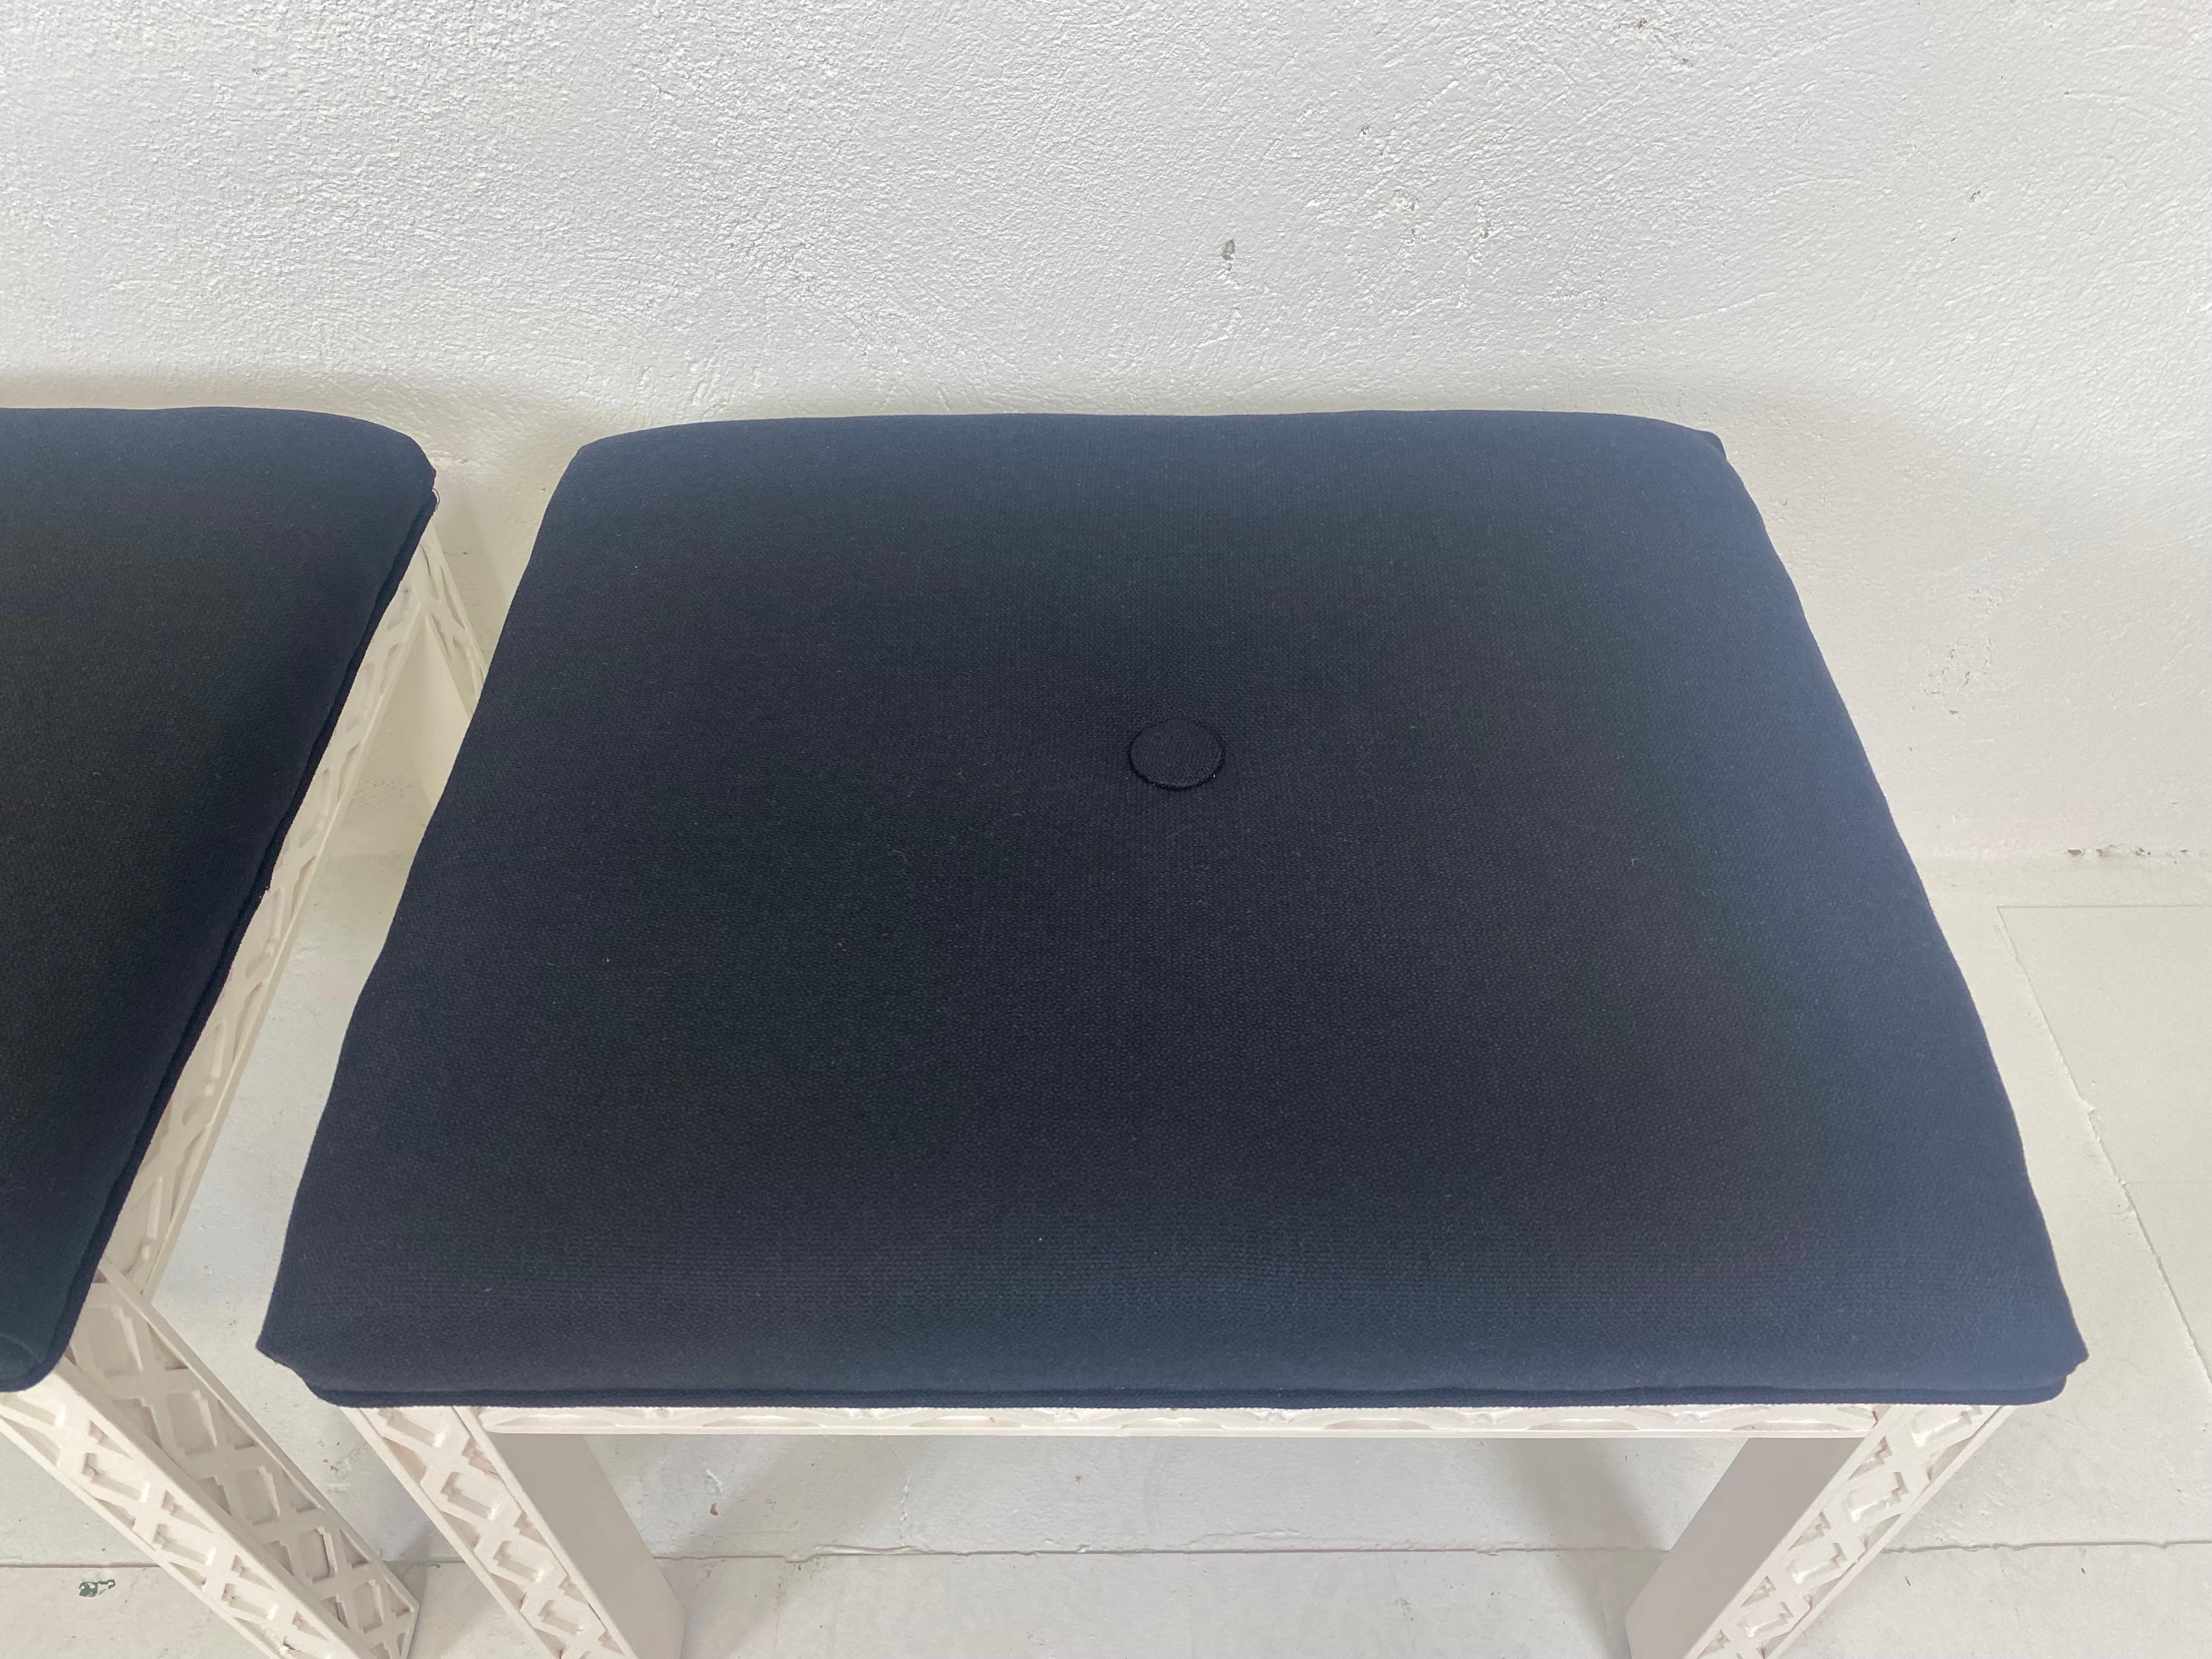 This is a pair of mid century Vintage Chippendale style benches. The Chippendale style legs on these benches have been painted white and have a black cotton upholstery with a large button in the center. These benches are American made circa 1970.